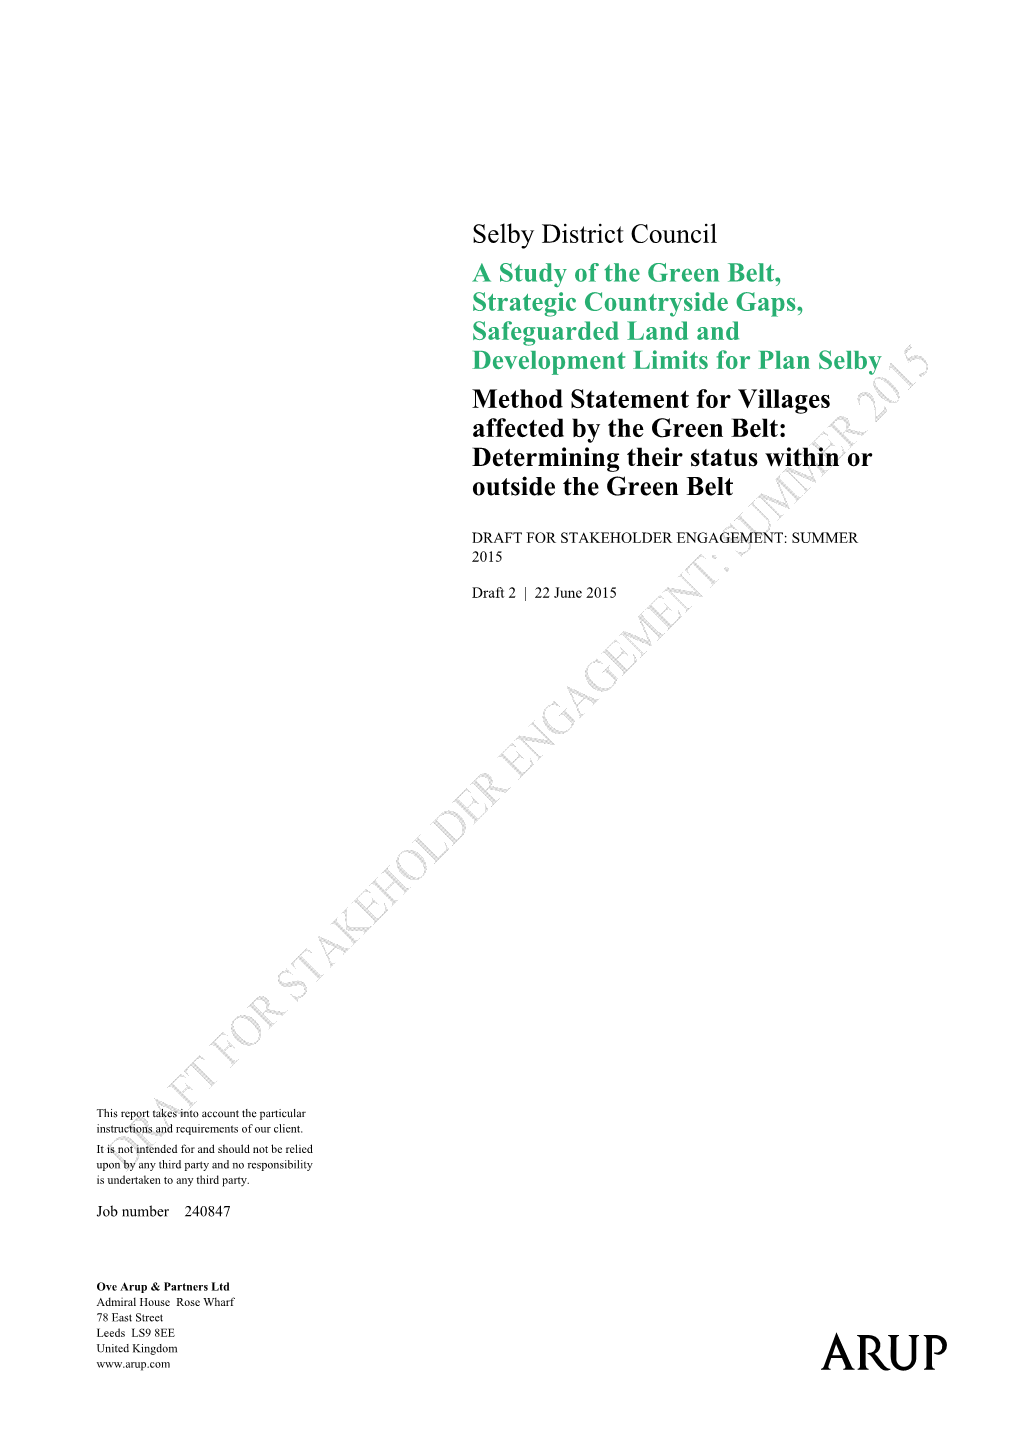 Selby District Council a Study of the Green Belt, Strategic Countryside